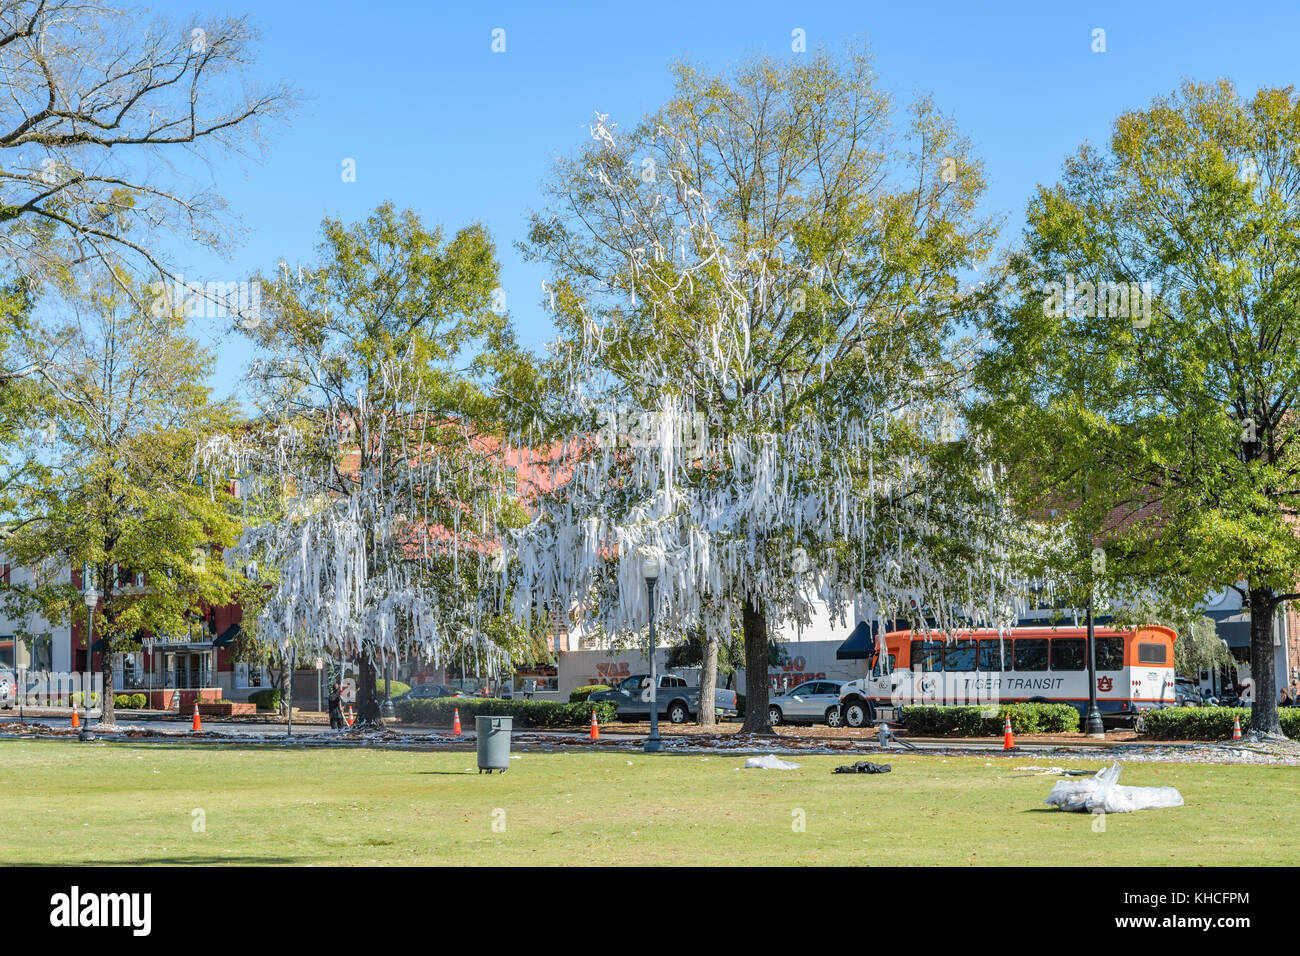 Clean up at Toomer's Corner, removing white toilet paper from the trees, after a win by Auburn University football team. Auburn Alabama, USA. Stock Photo